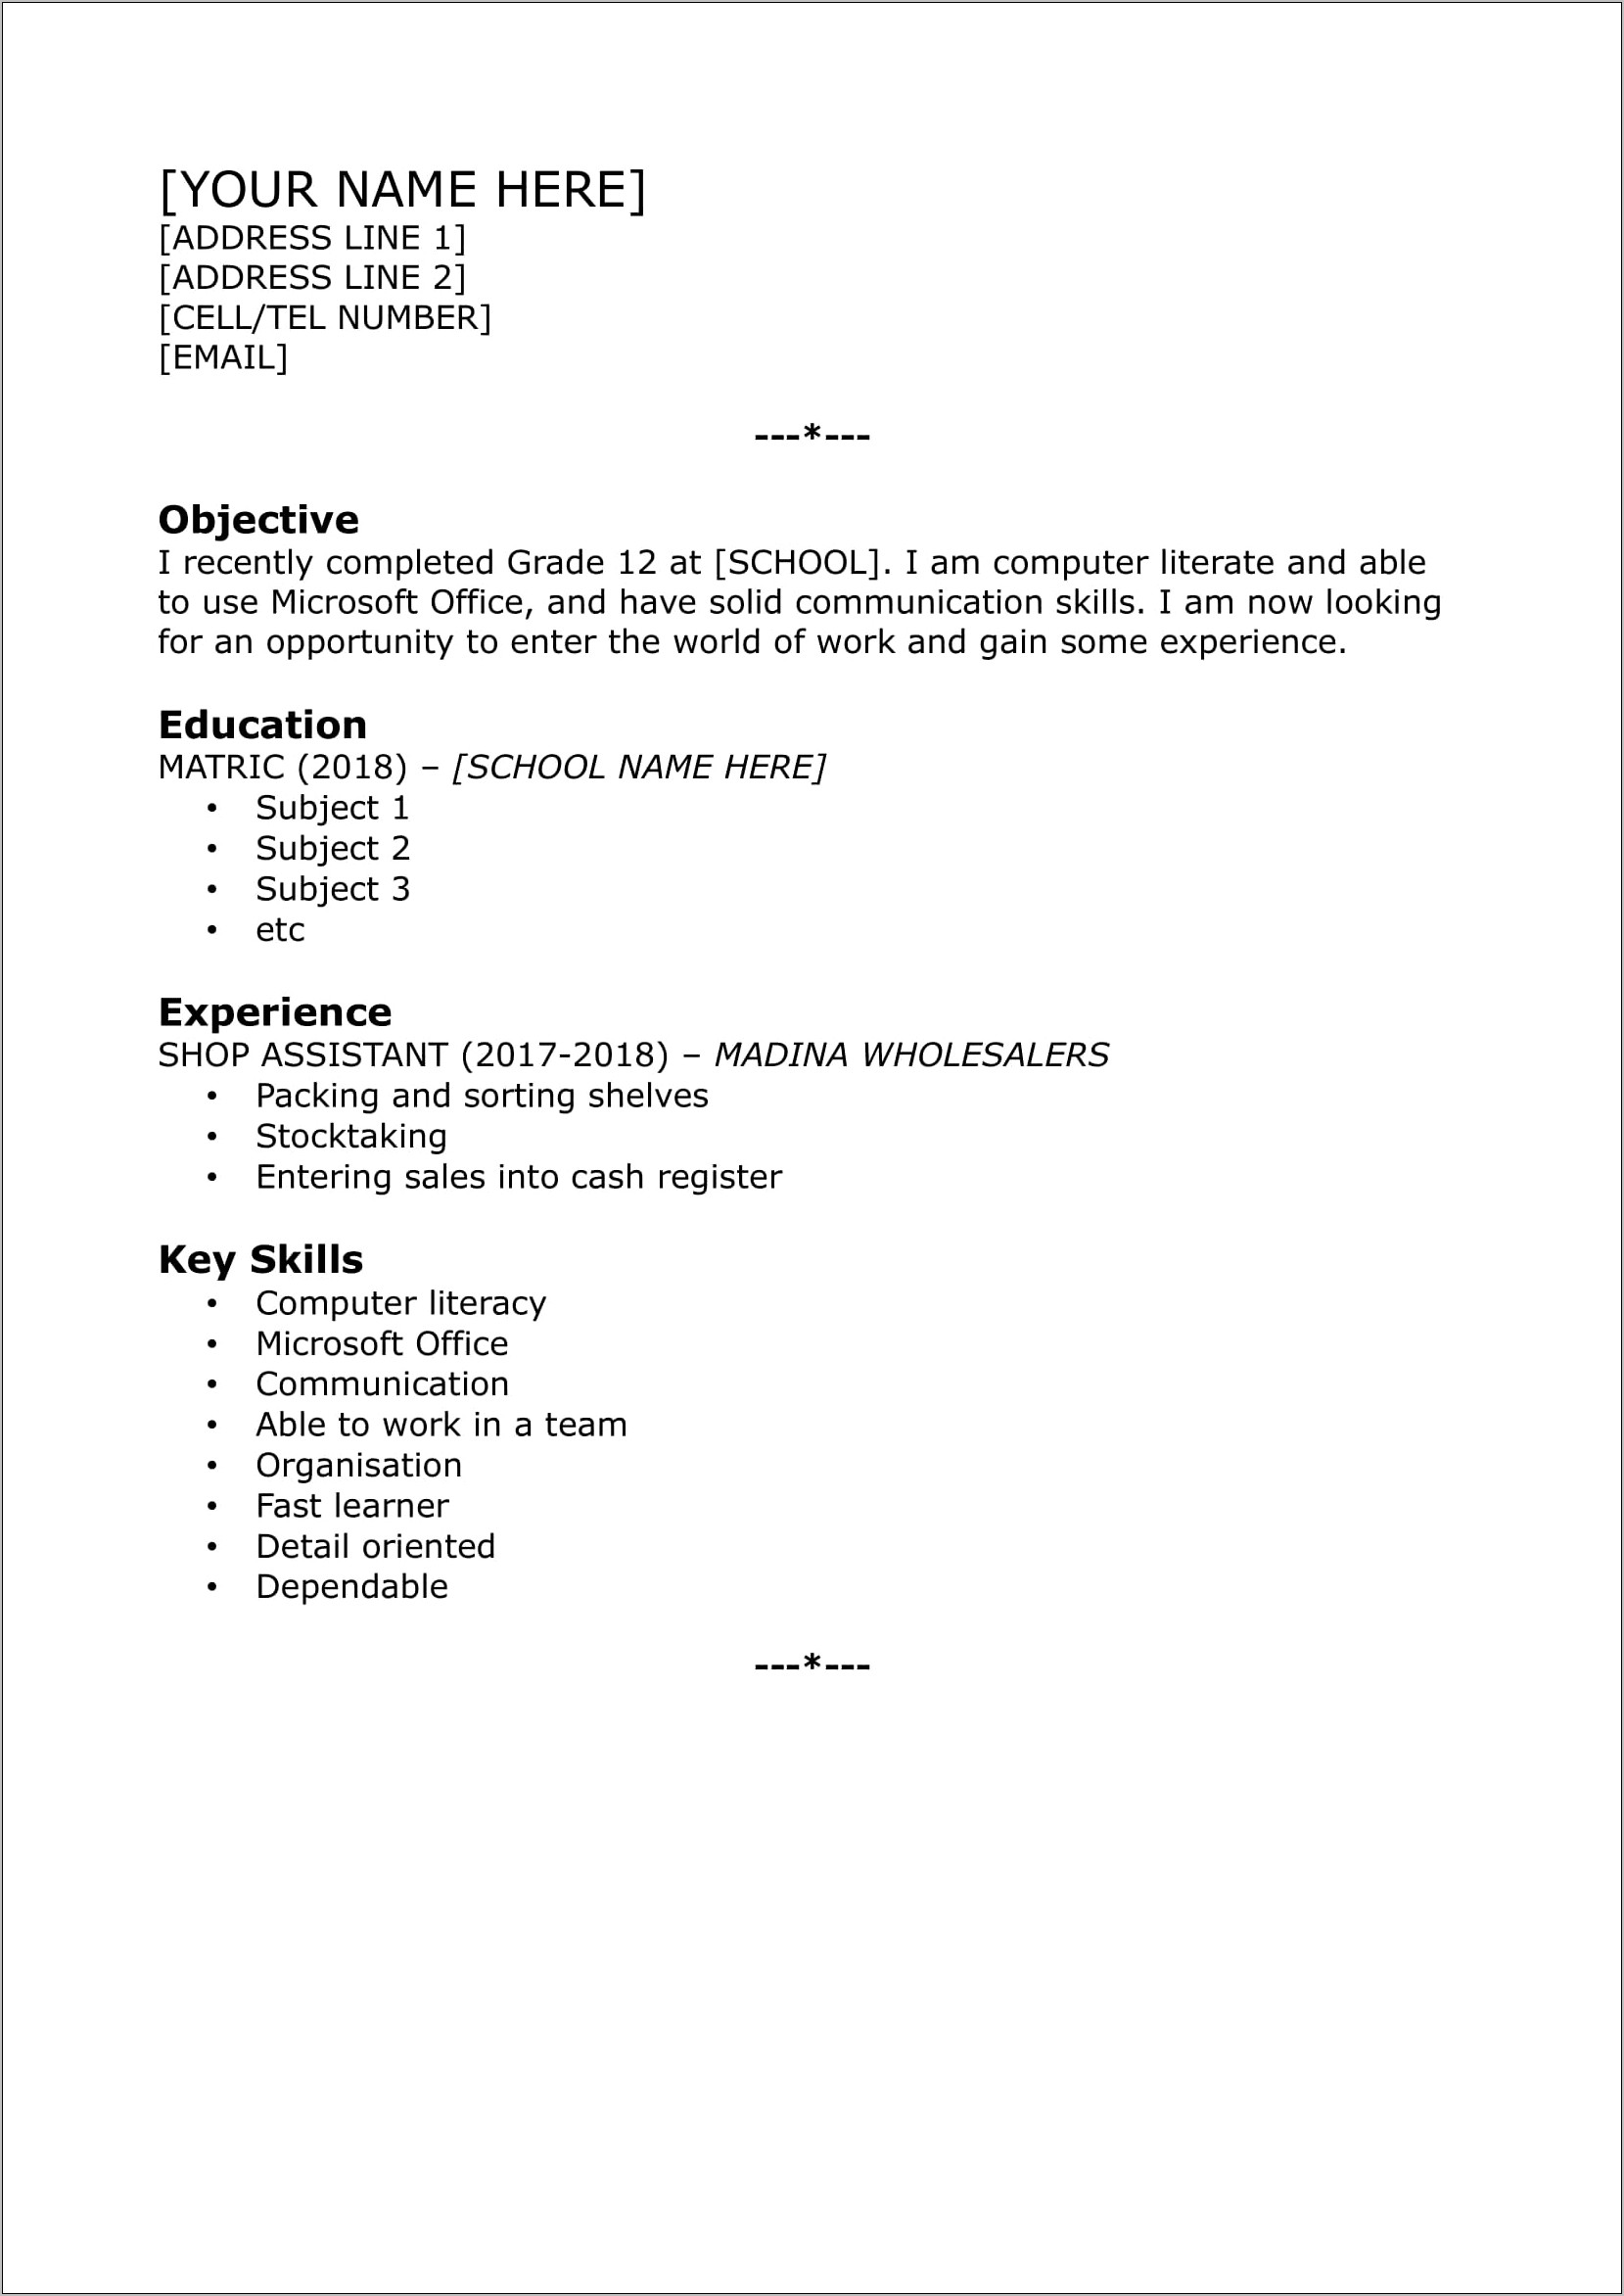 Sample Resume Format For 12th Pass Student